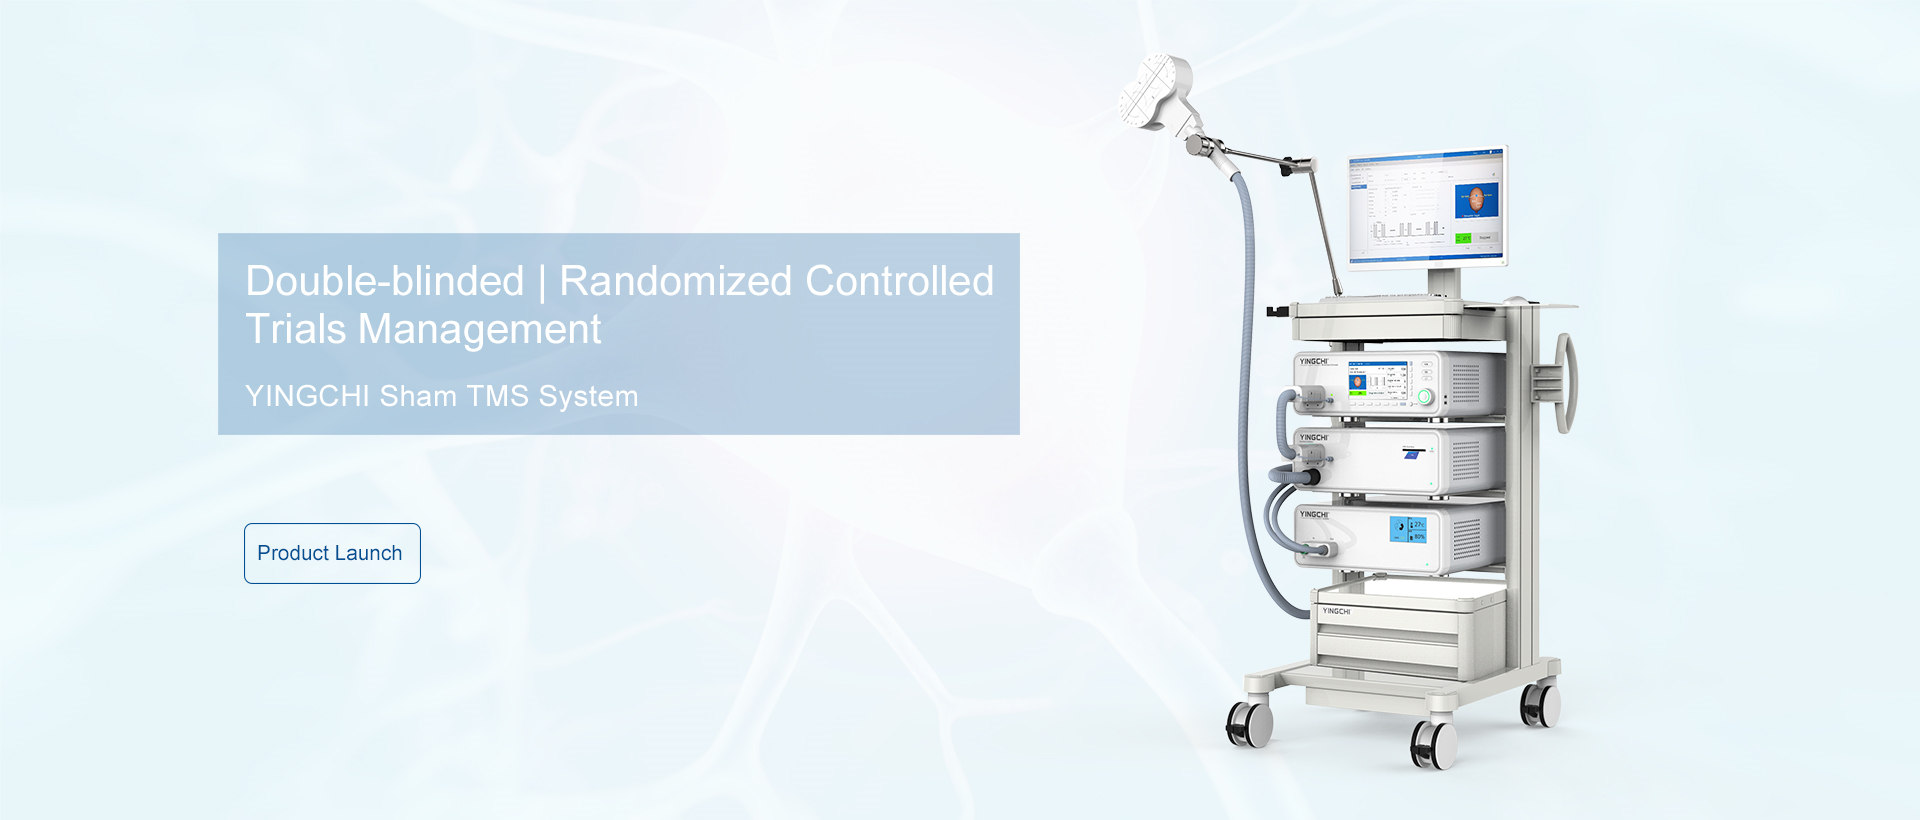 Double-blinded Randomized Controlled Trials Management YINGCHI Sham TMS System banner